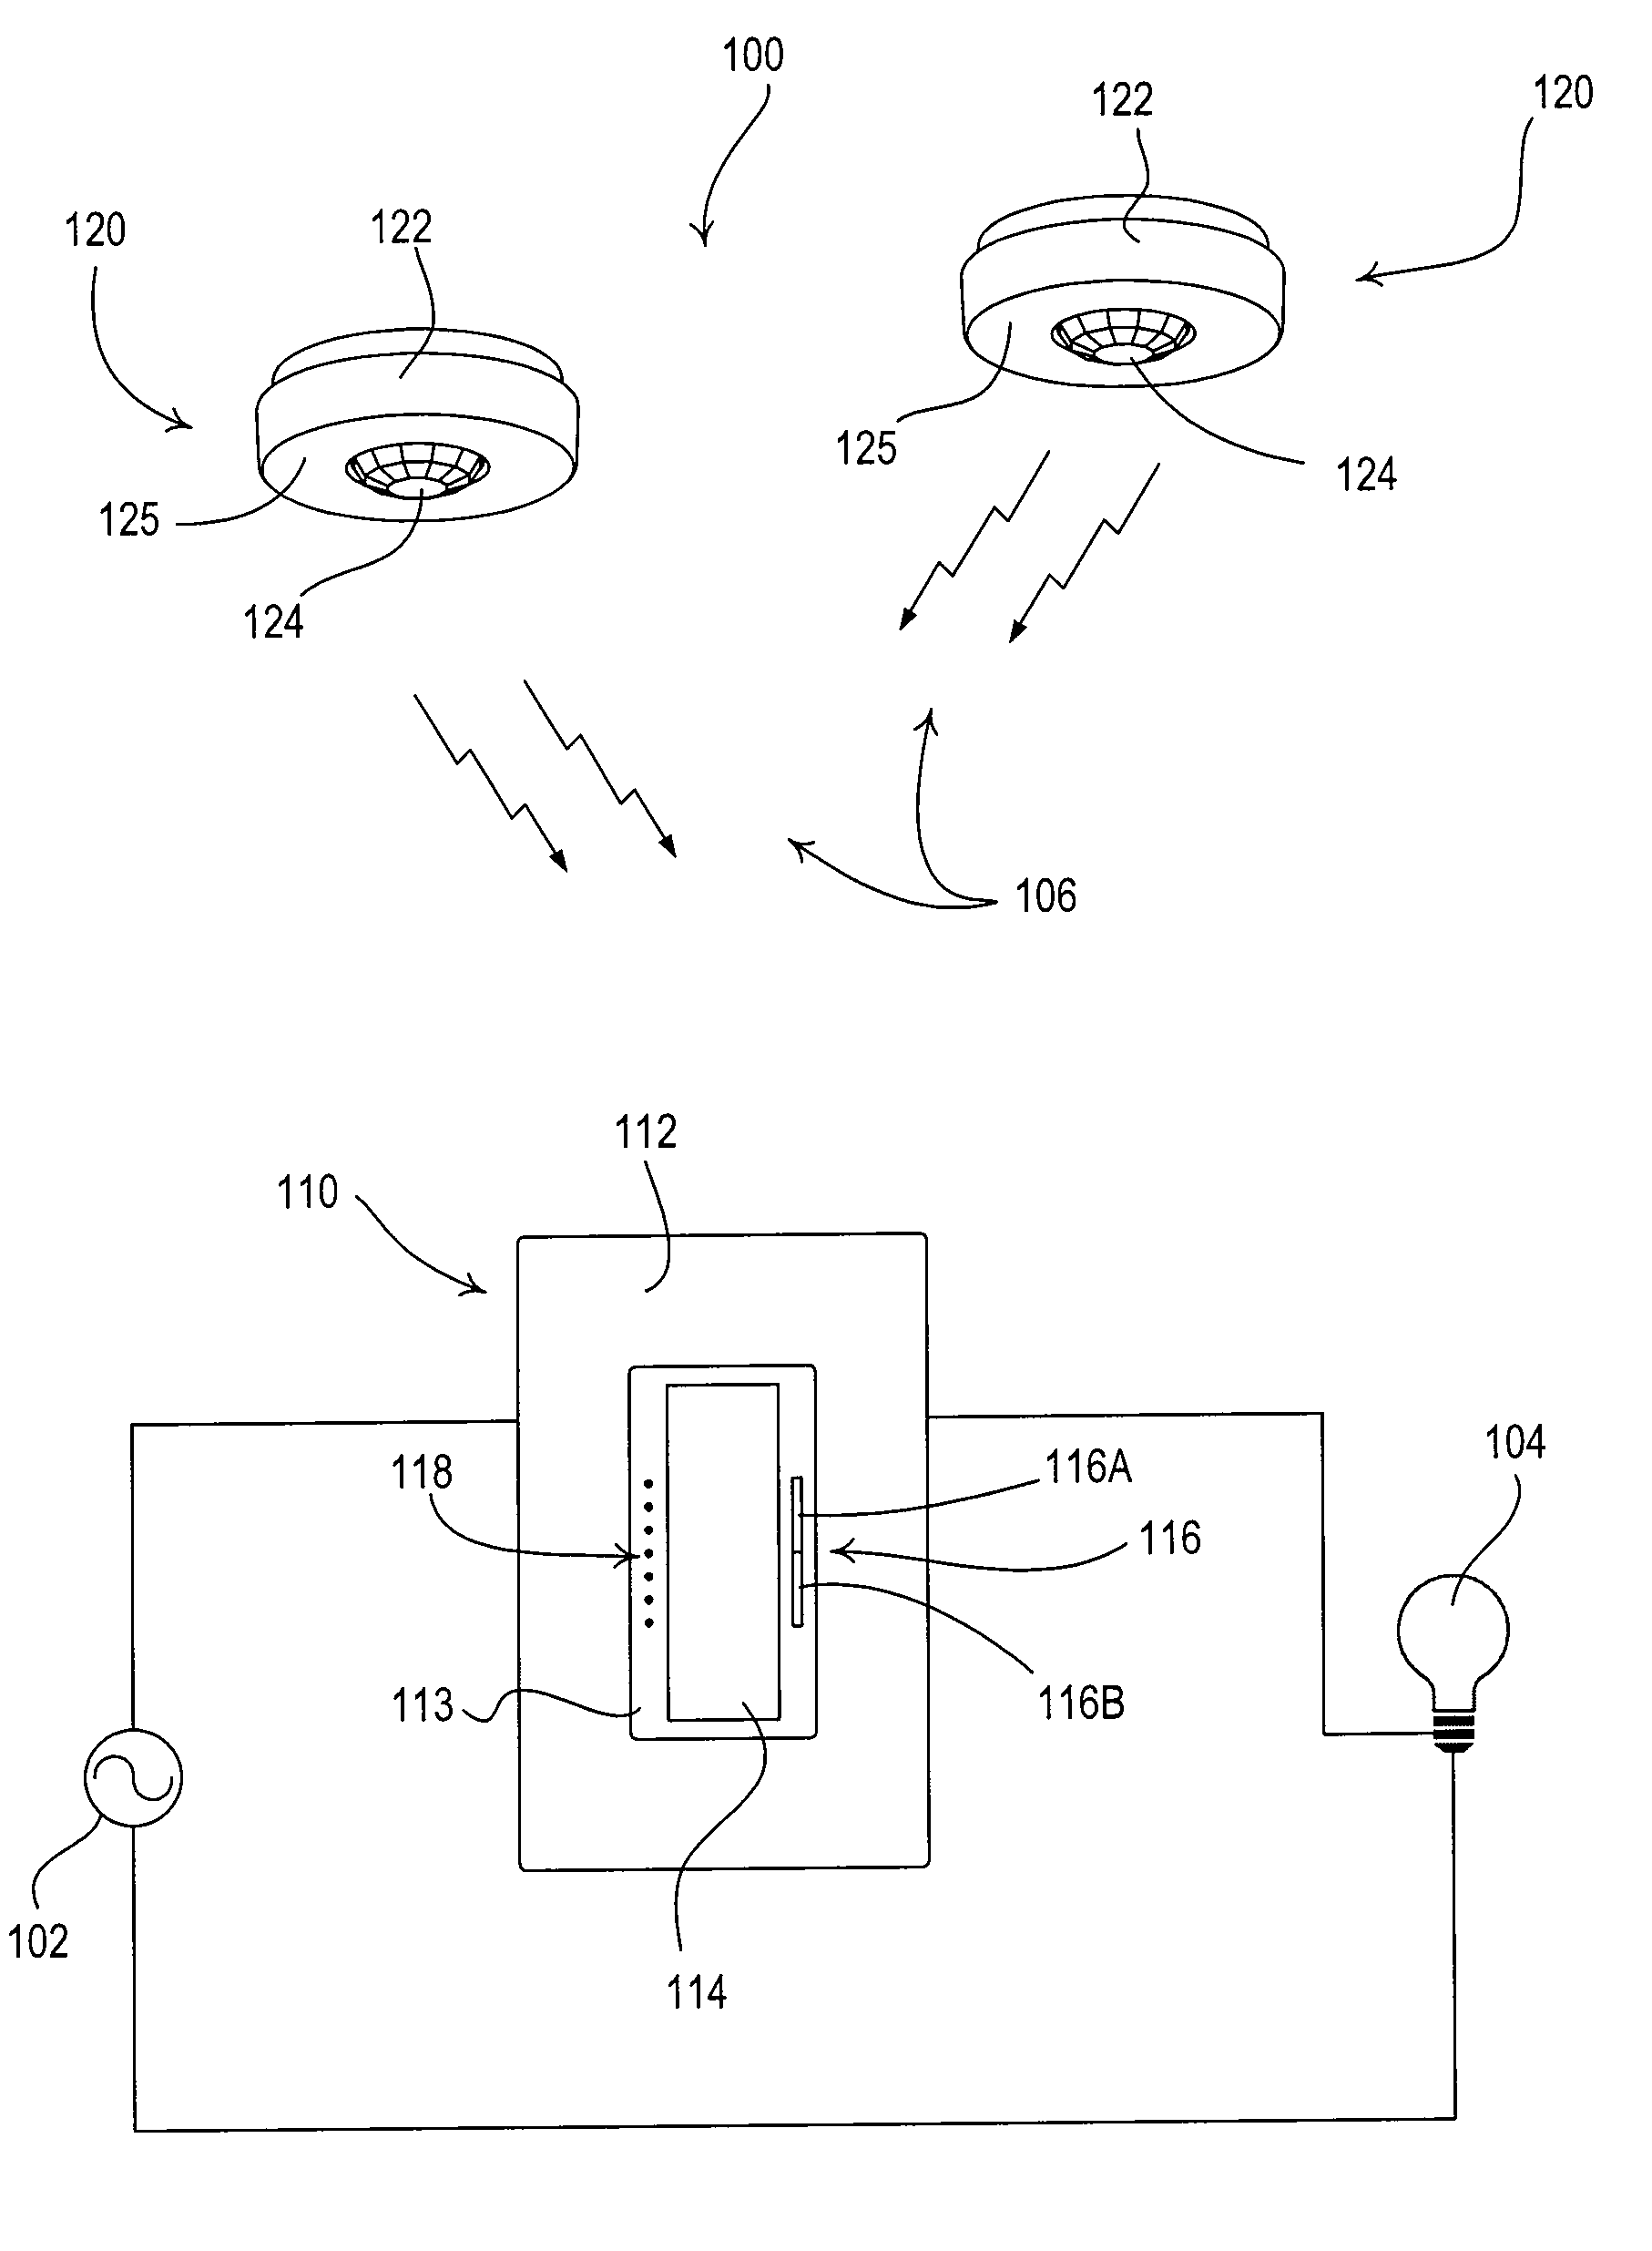 Radio-frequency lighting control system with occupancy sensing